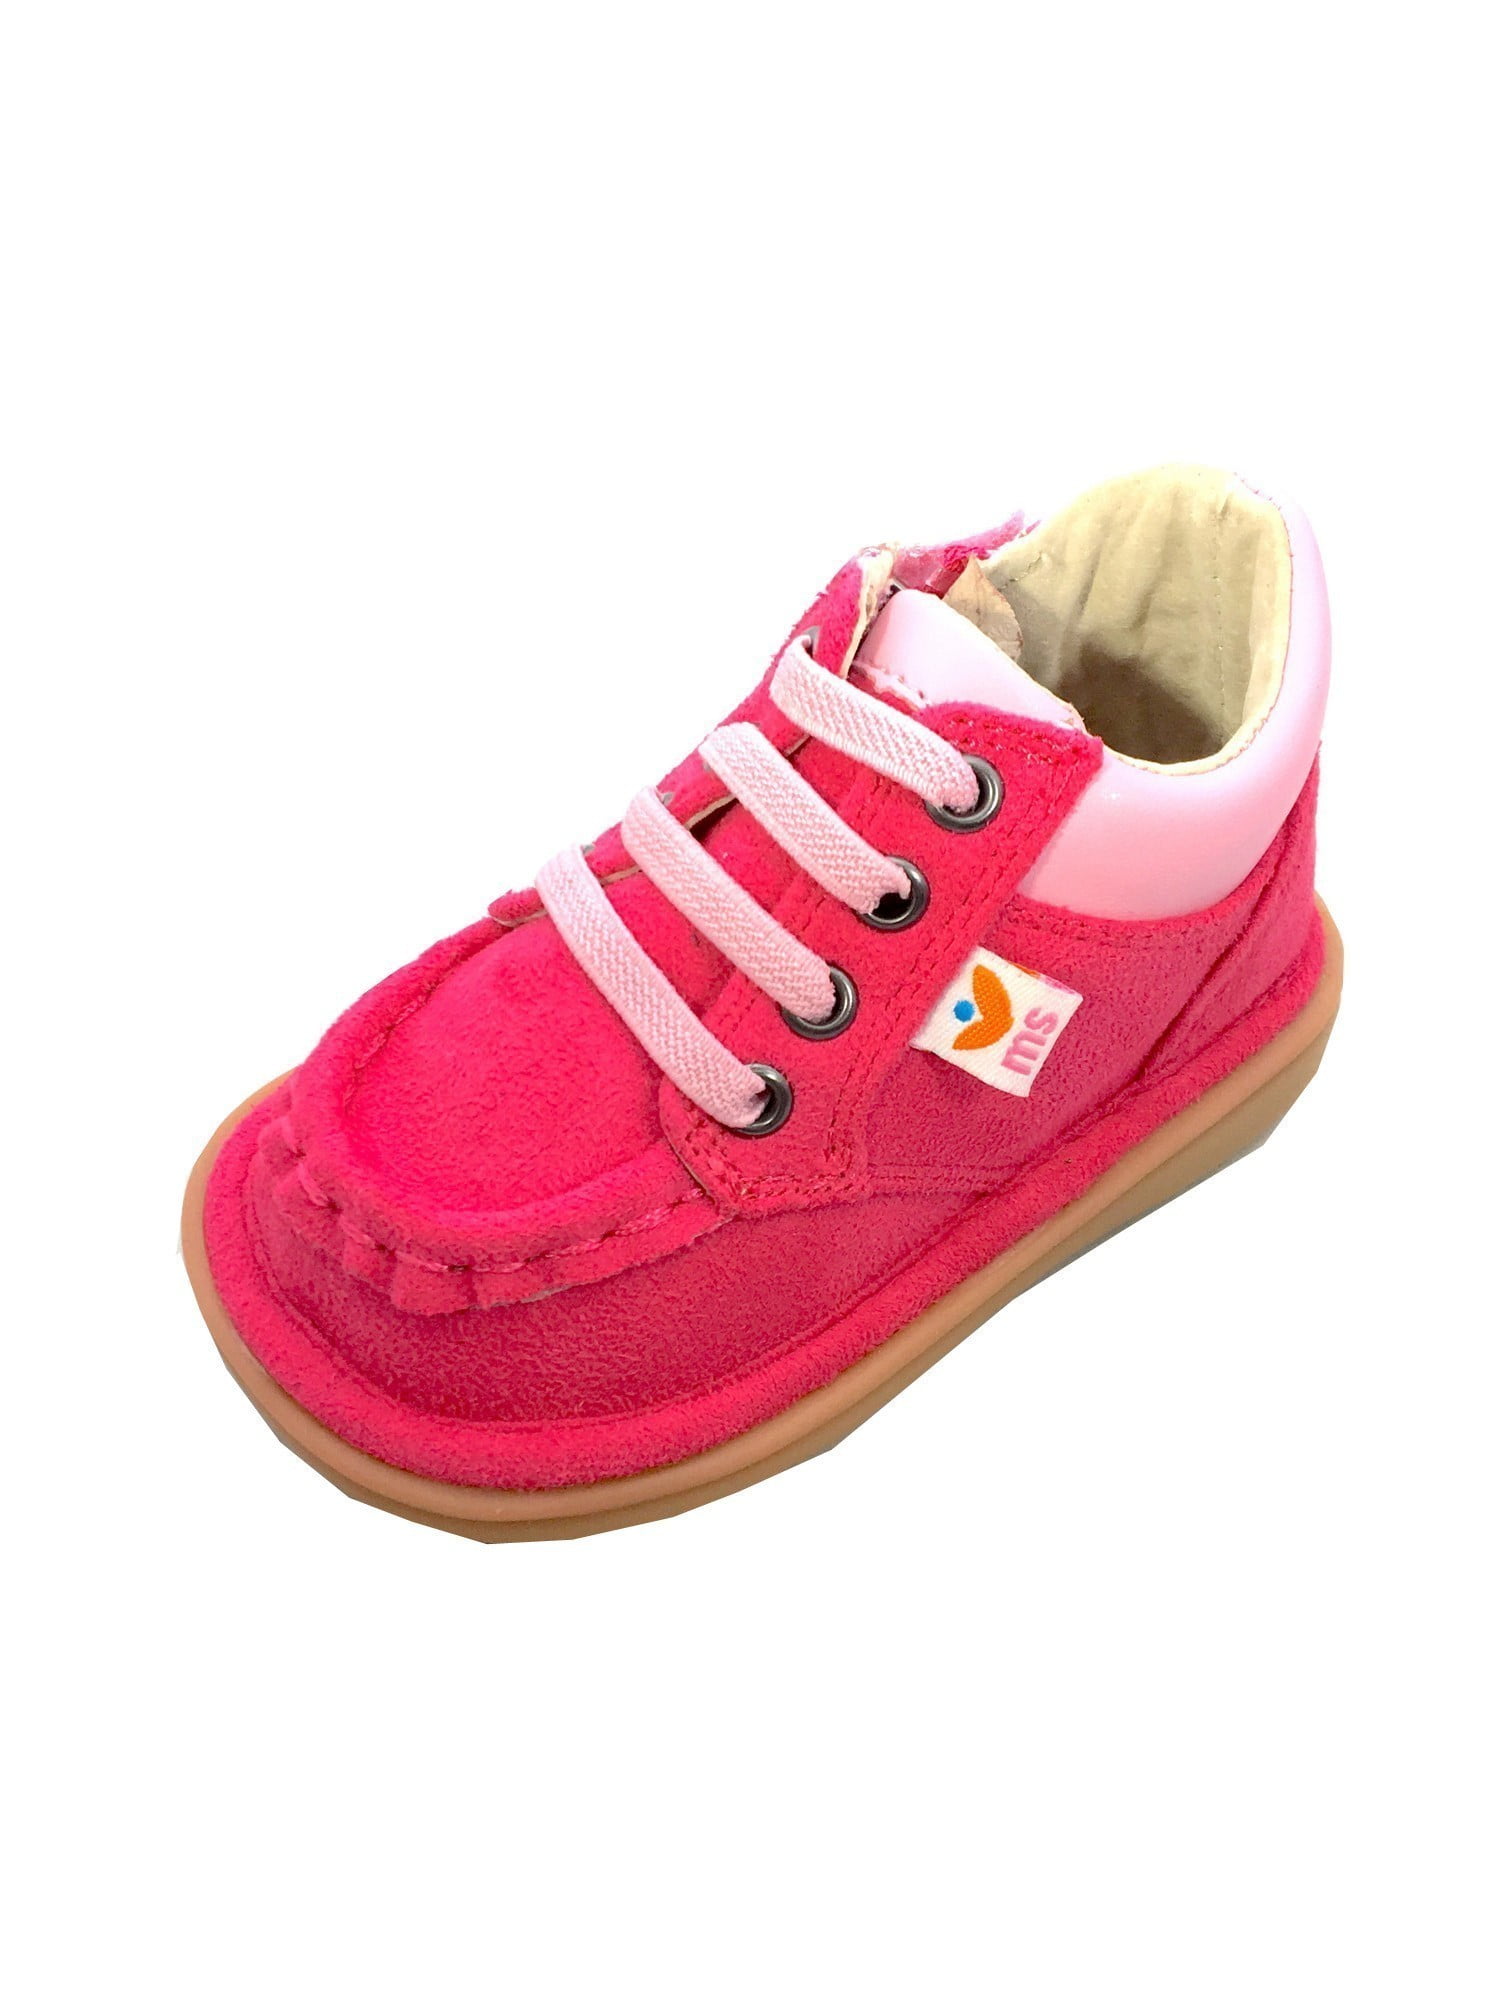 shoes for toddlers walmart